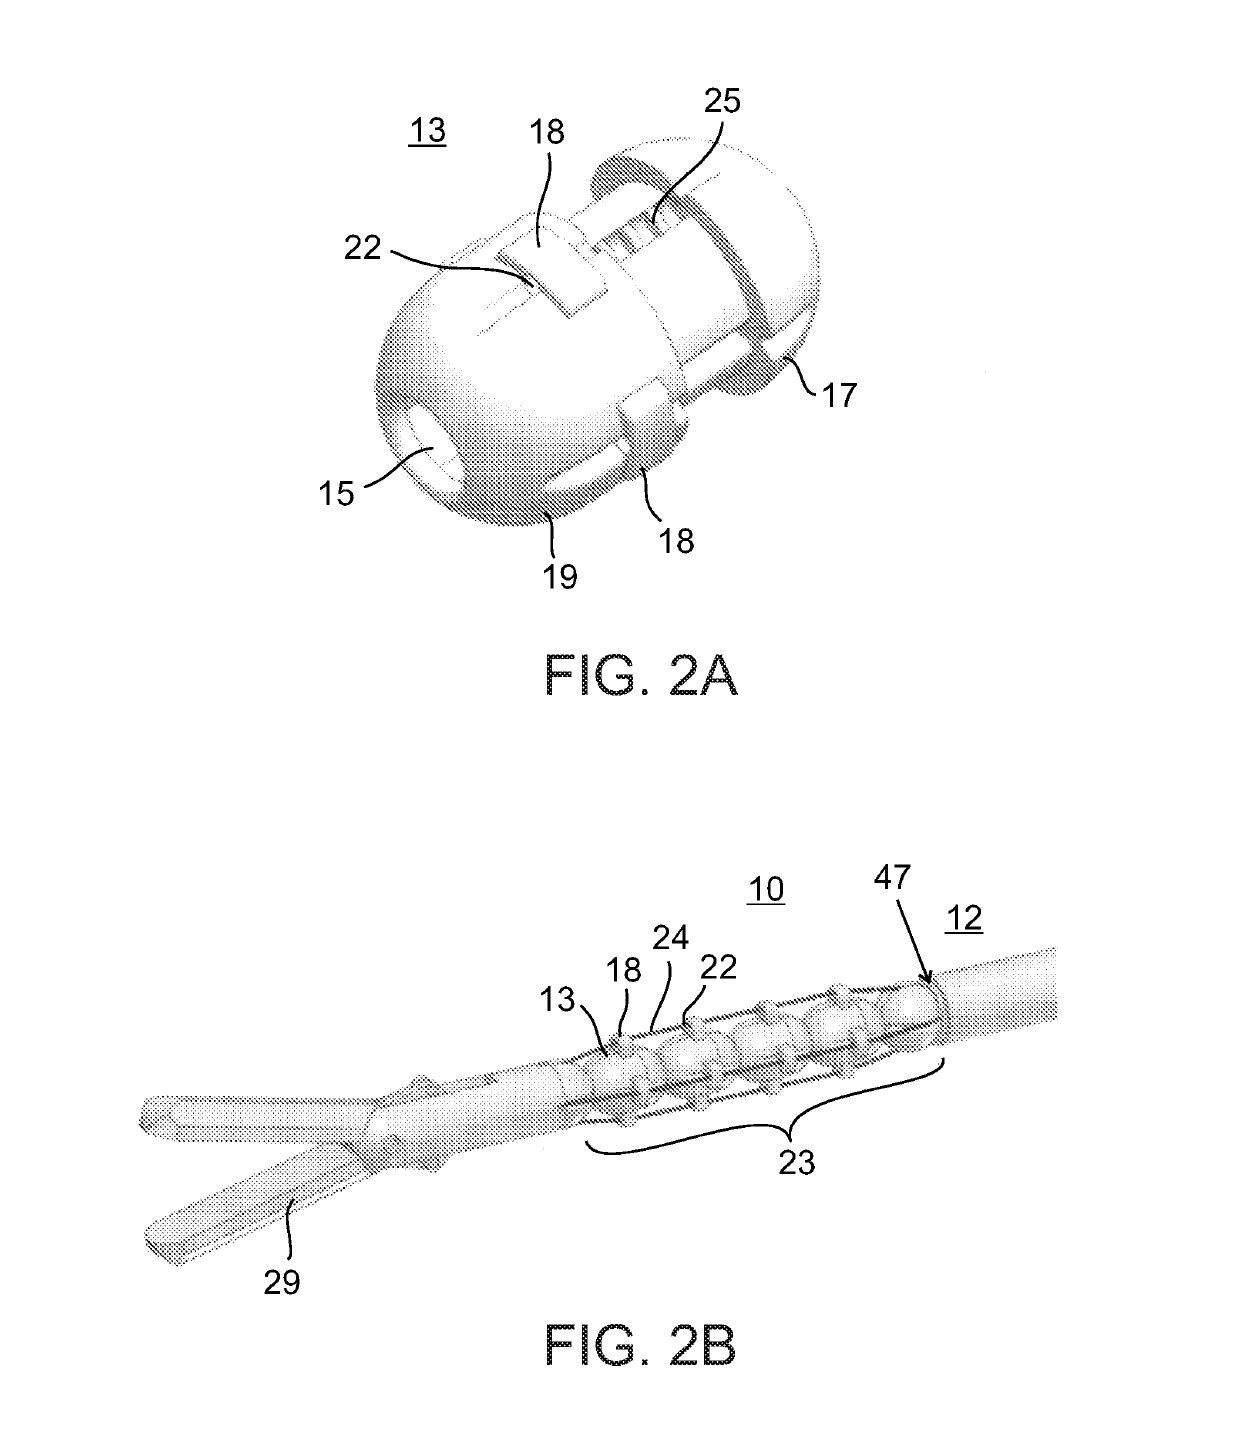 Steerable medical device